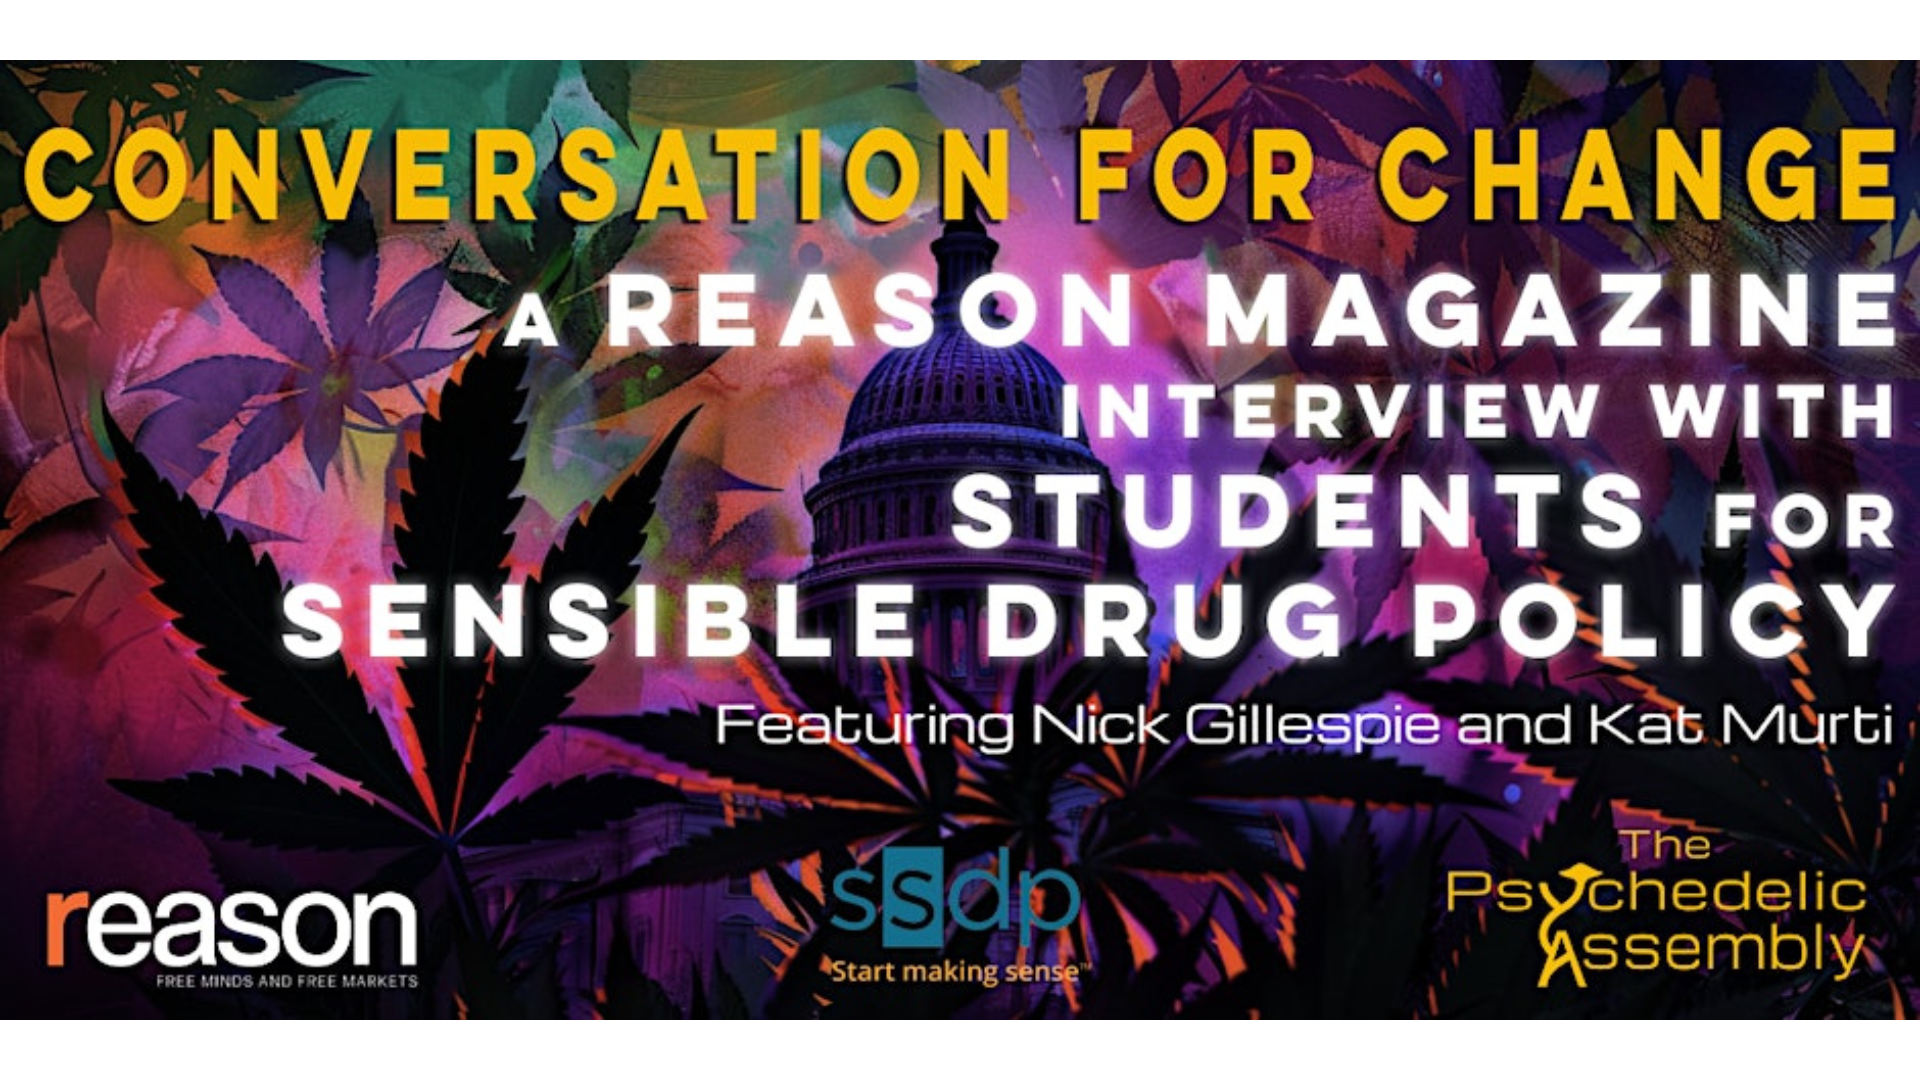 Image promoting live interview with Nick Gillespie and Students for Sensible Drug Policy's Kat Murti